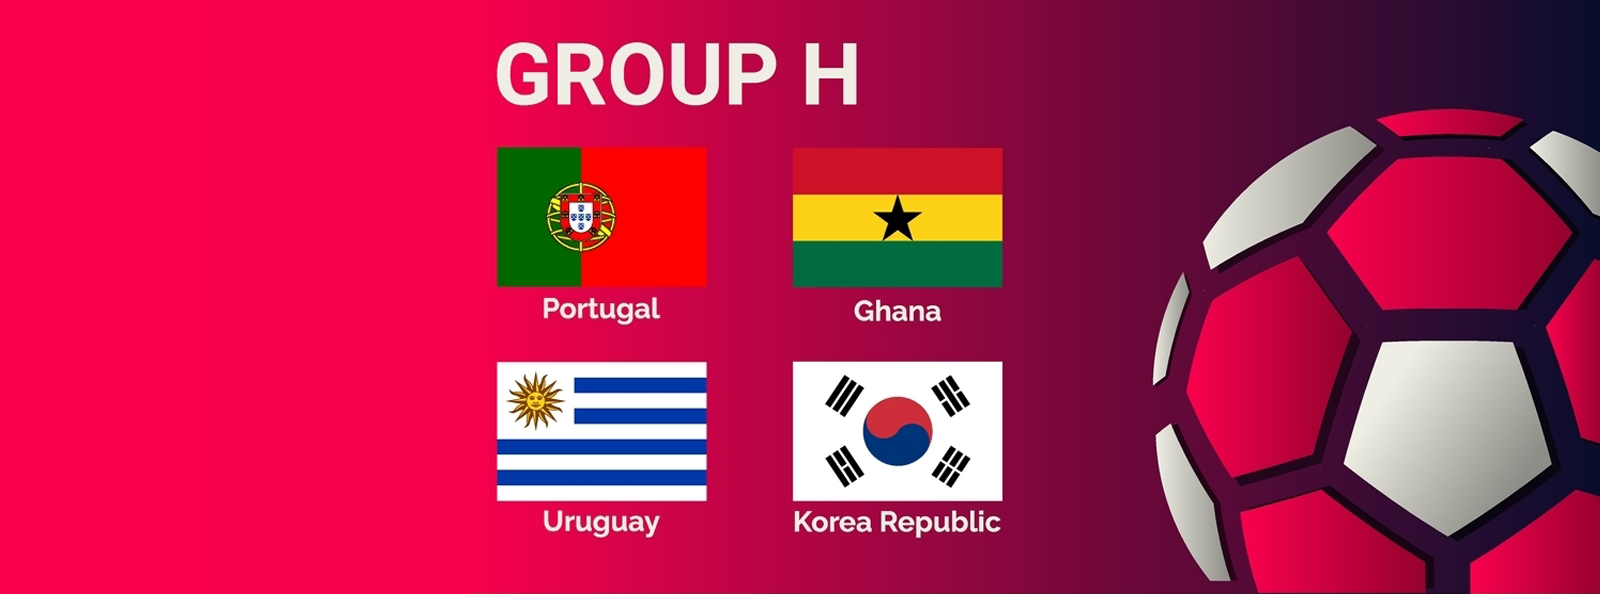 Overview of Group H